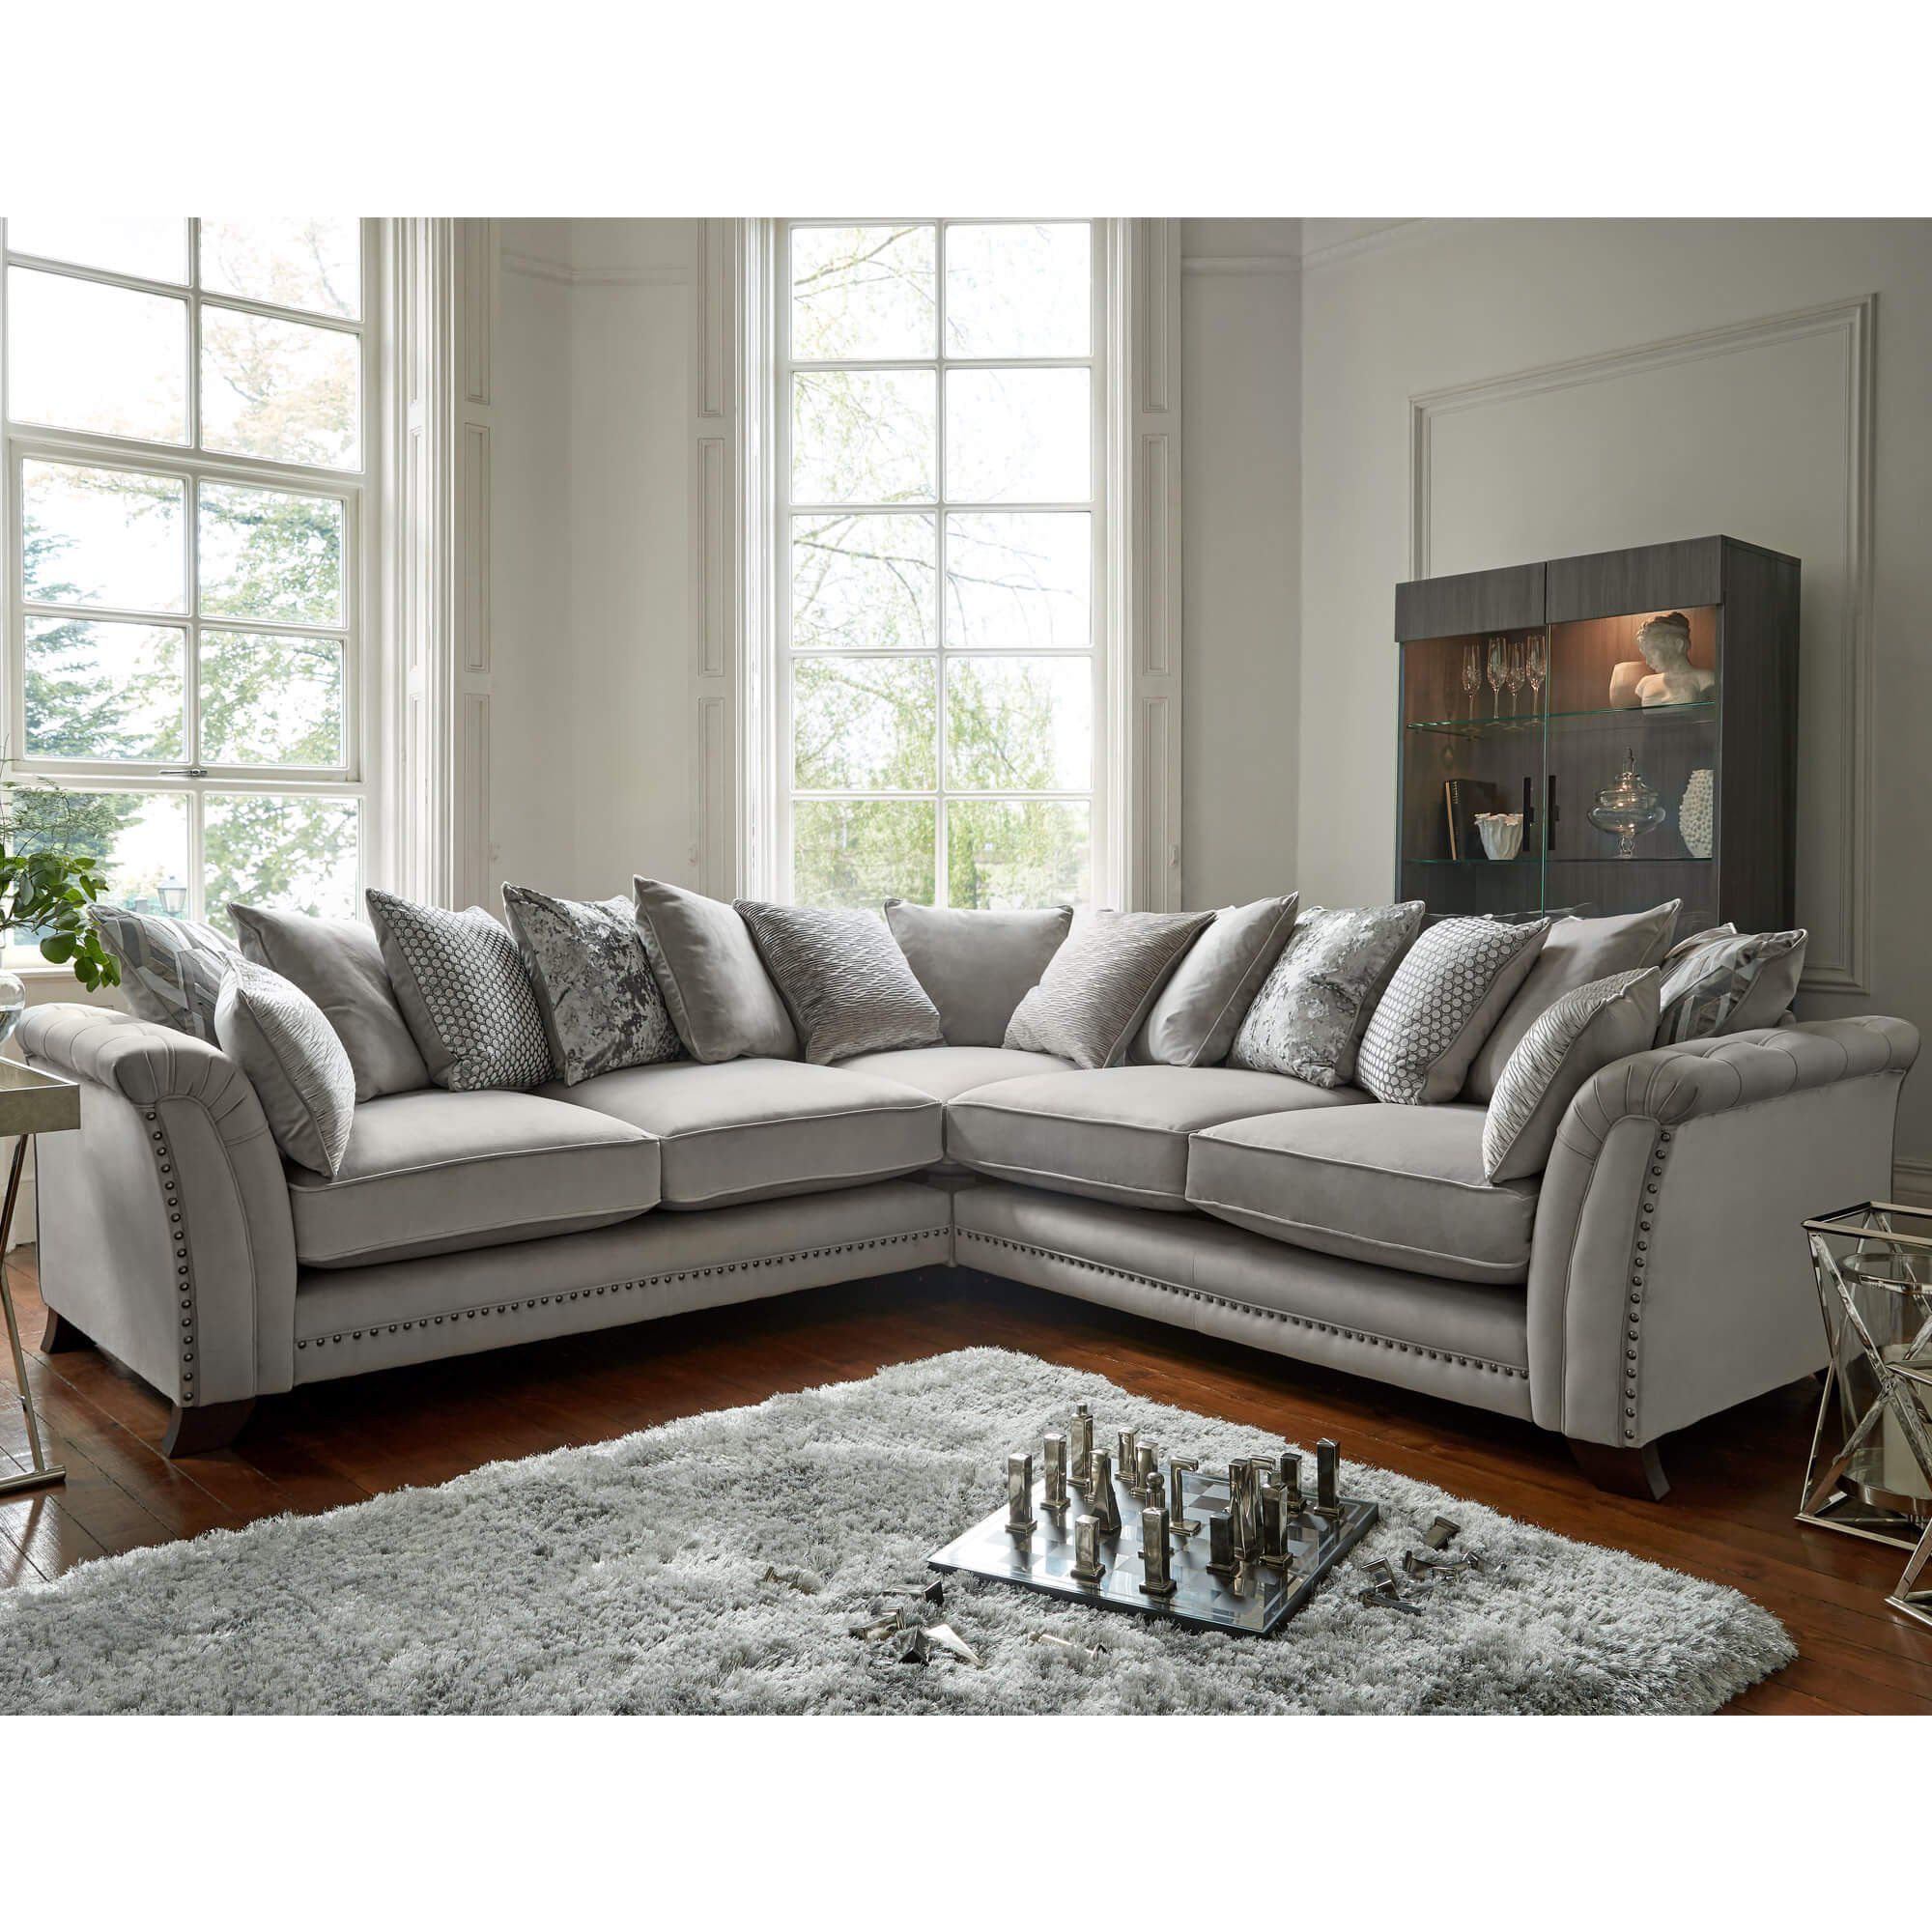 Fairfield Silver Velvet Pillow Back Sofa Collection For Sofas With Pillowback Wood Bases (View 8 of 15)